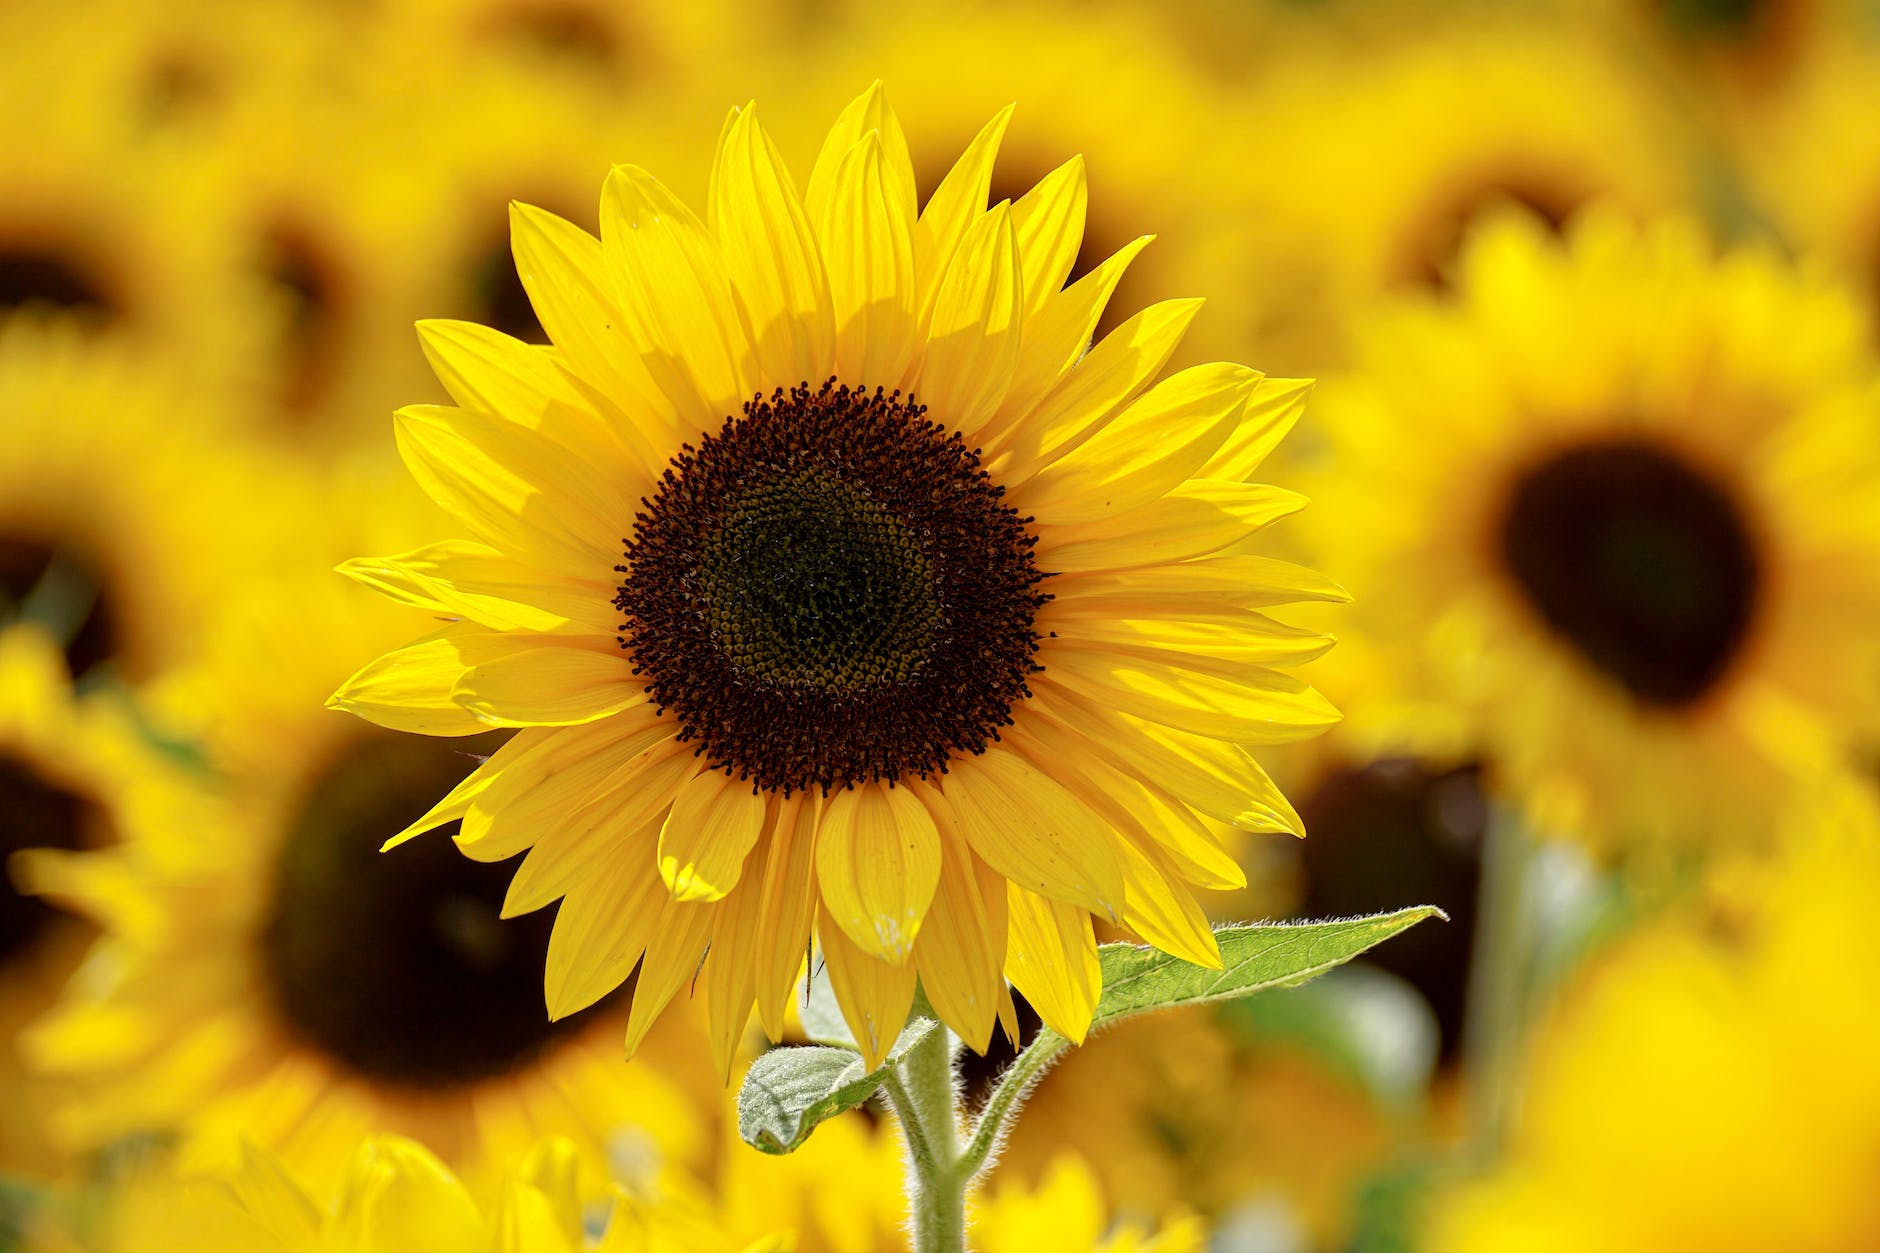 shallow focus photography of yellow sunflower field under sunny sky